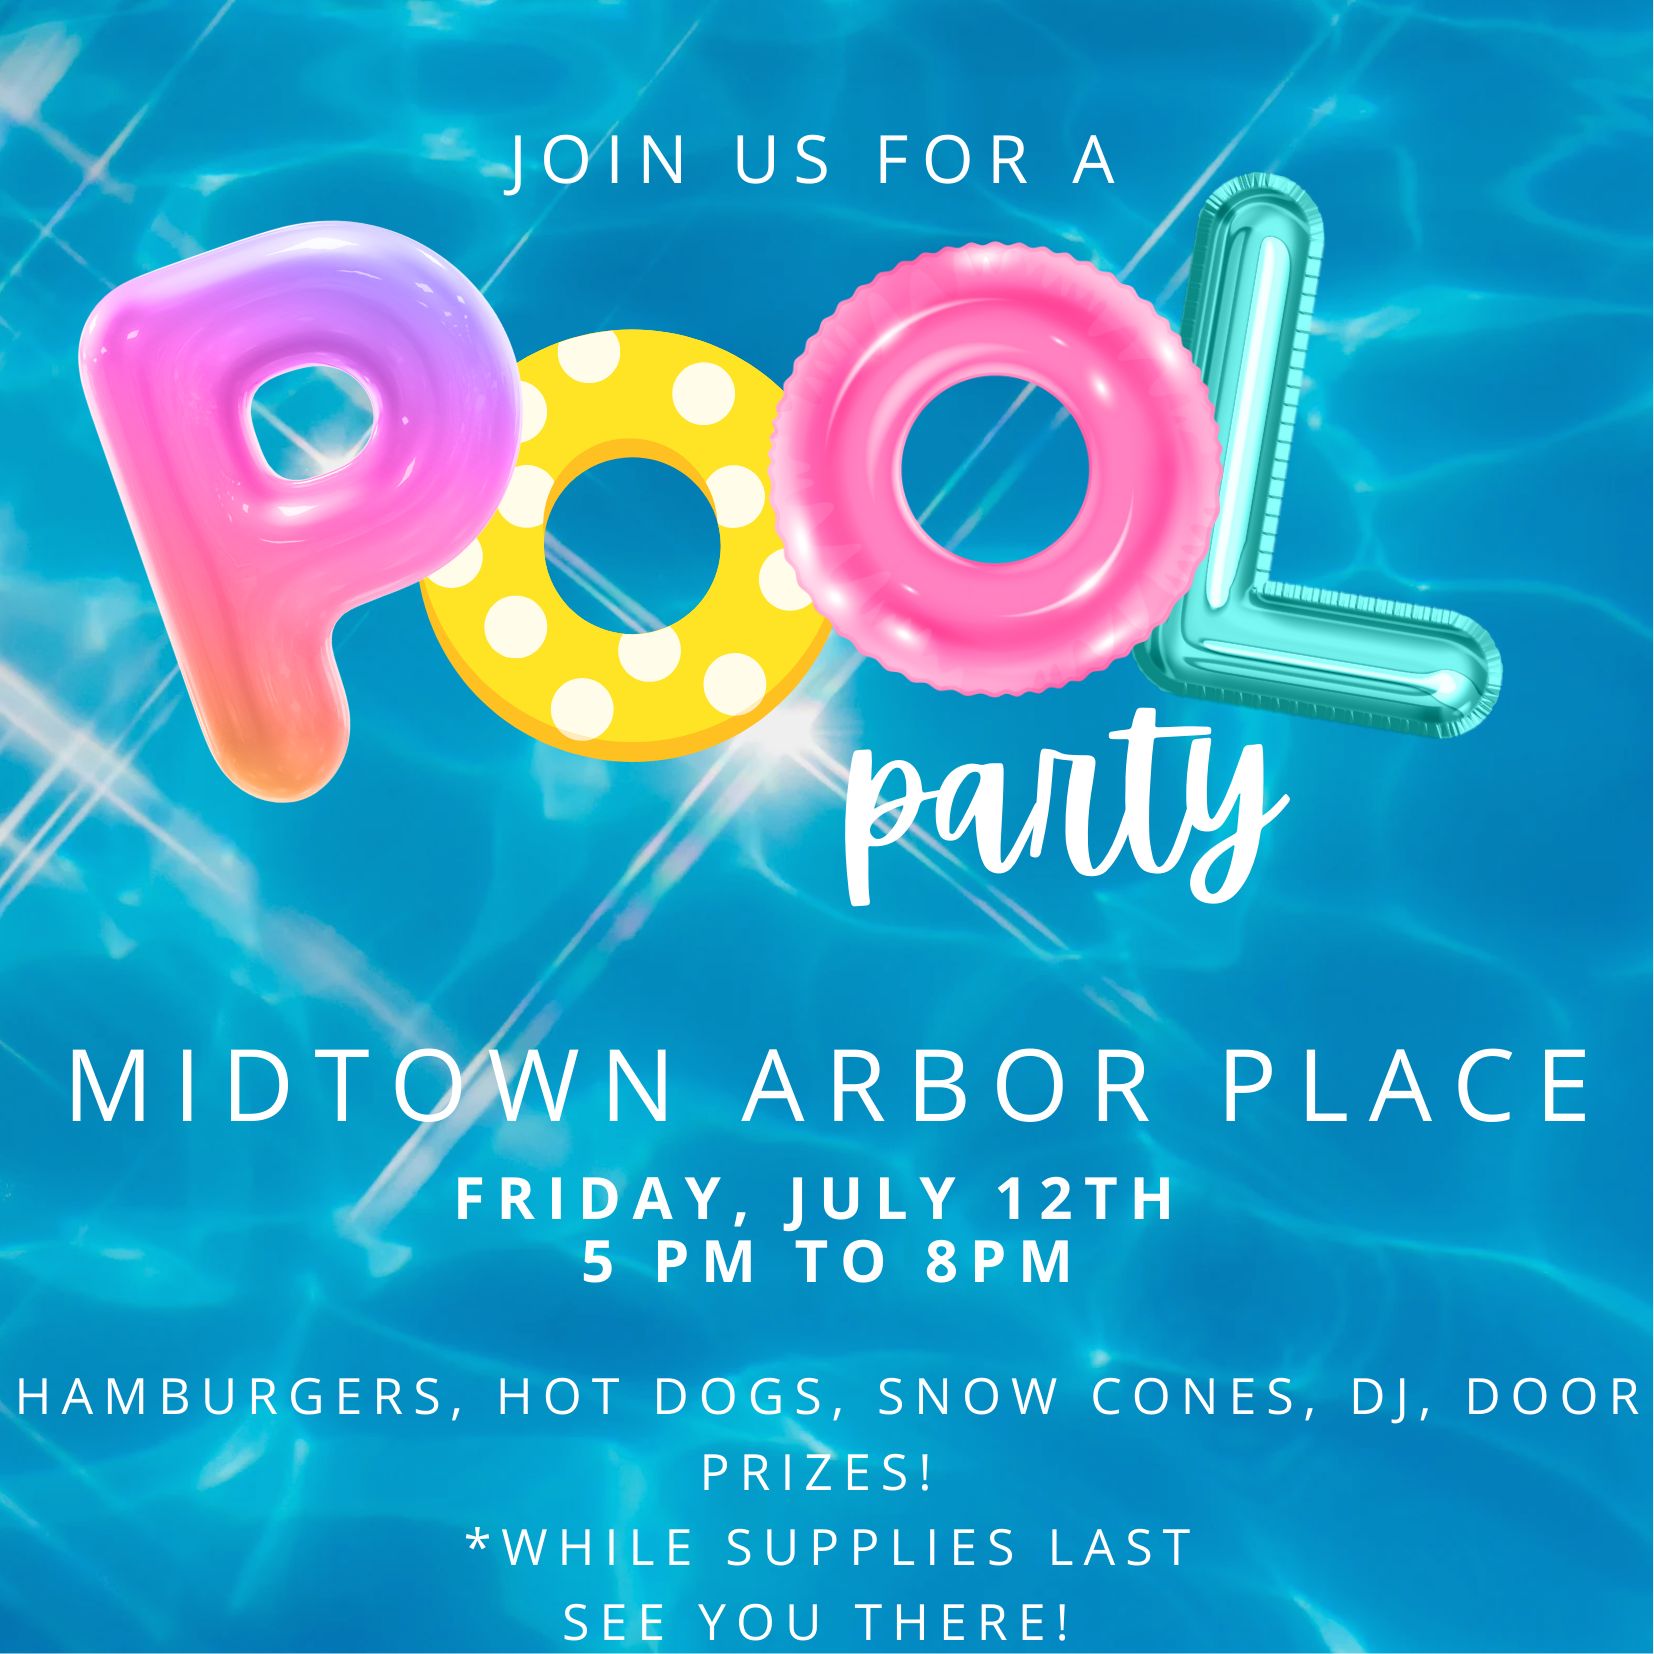 Apartments For Rent Midtown Houston Flyer announcing a pool party at Midtown Arbor Place on Friday, July 12th from 5 PM to 8 PM, featuring hamburgers, hot dogs, snow cones, DJ, door prizes, and more, while supplies last.